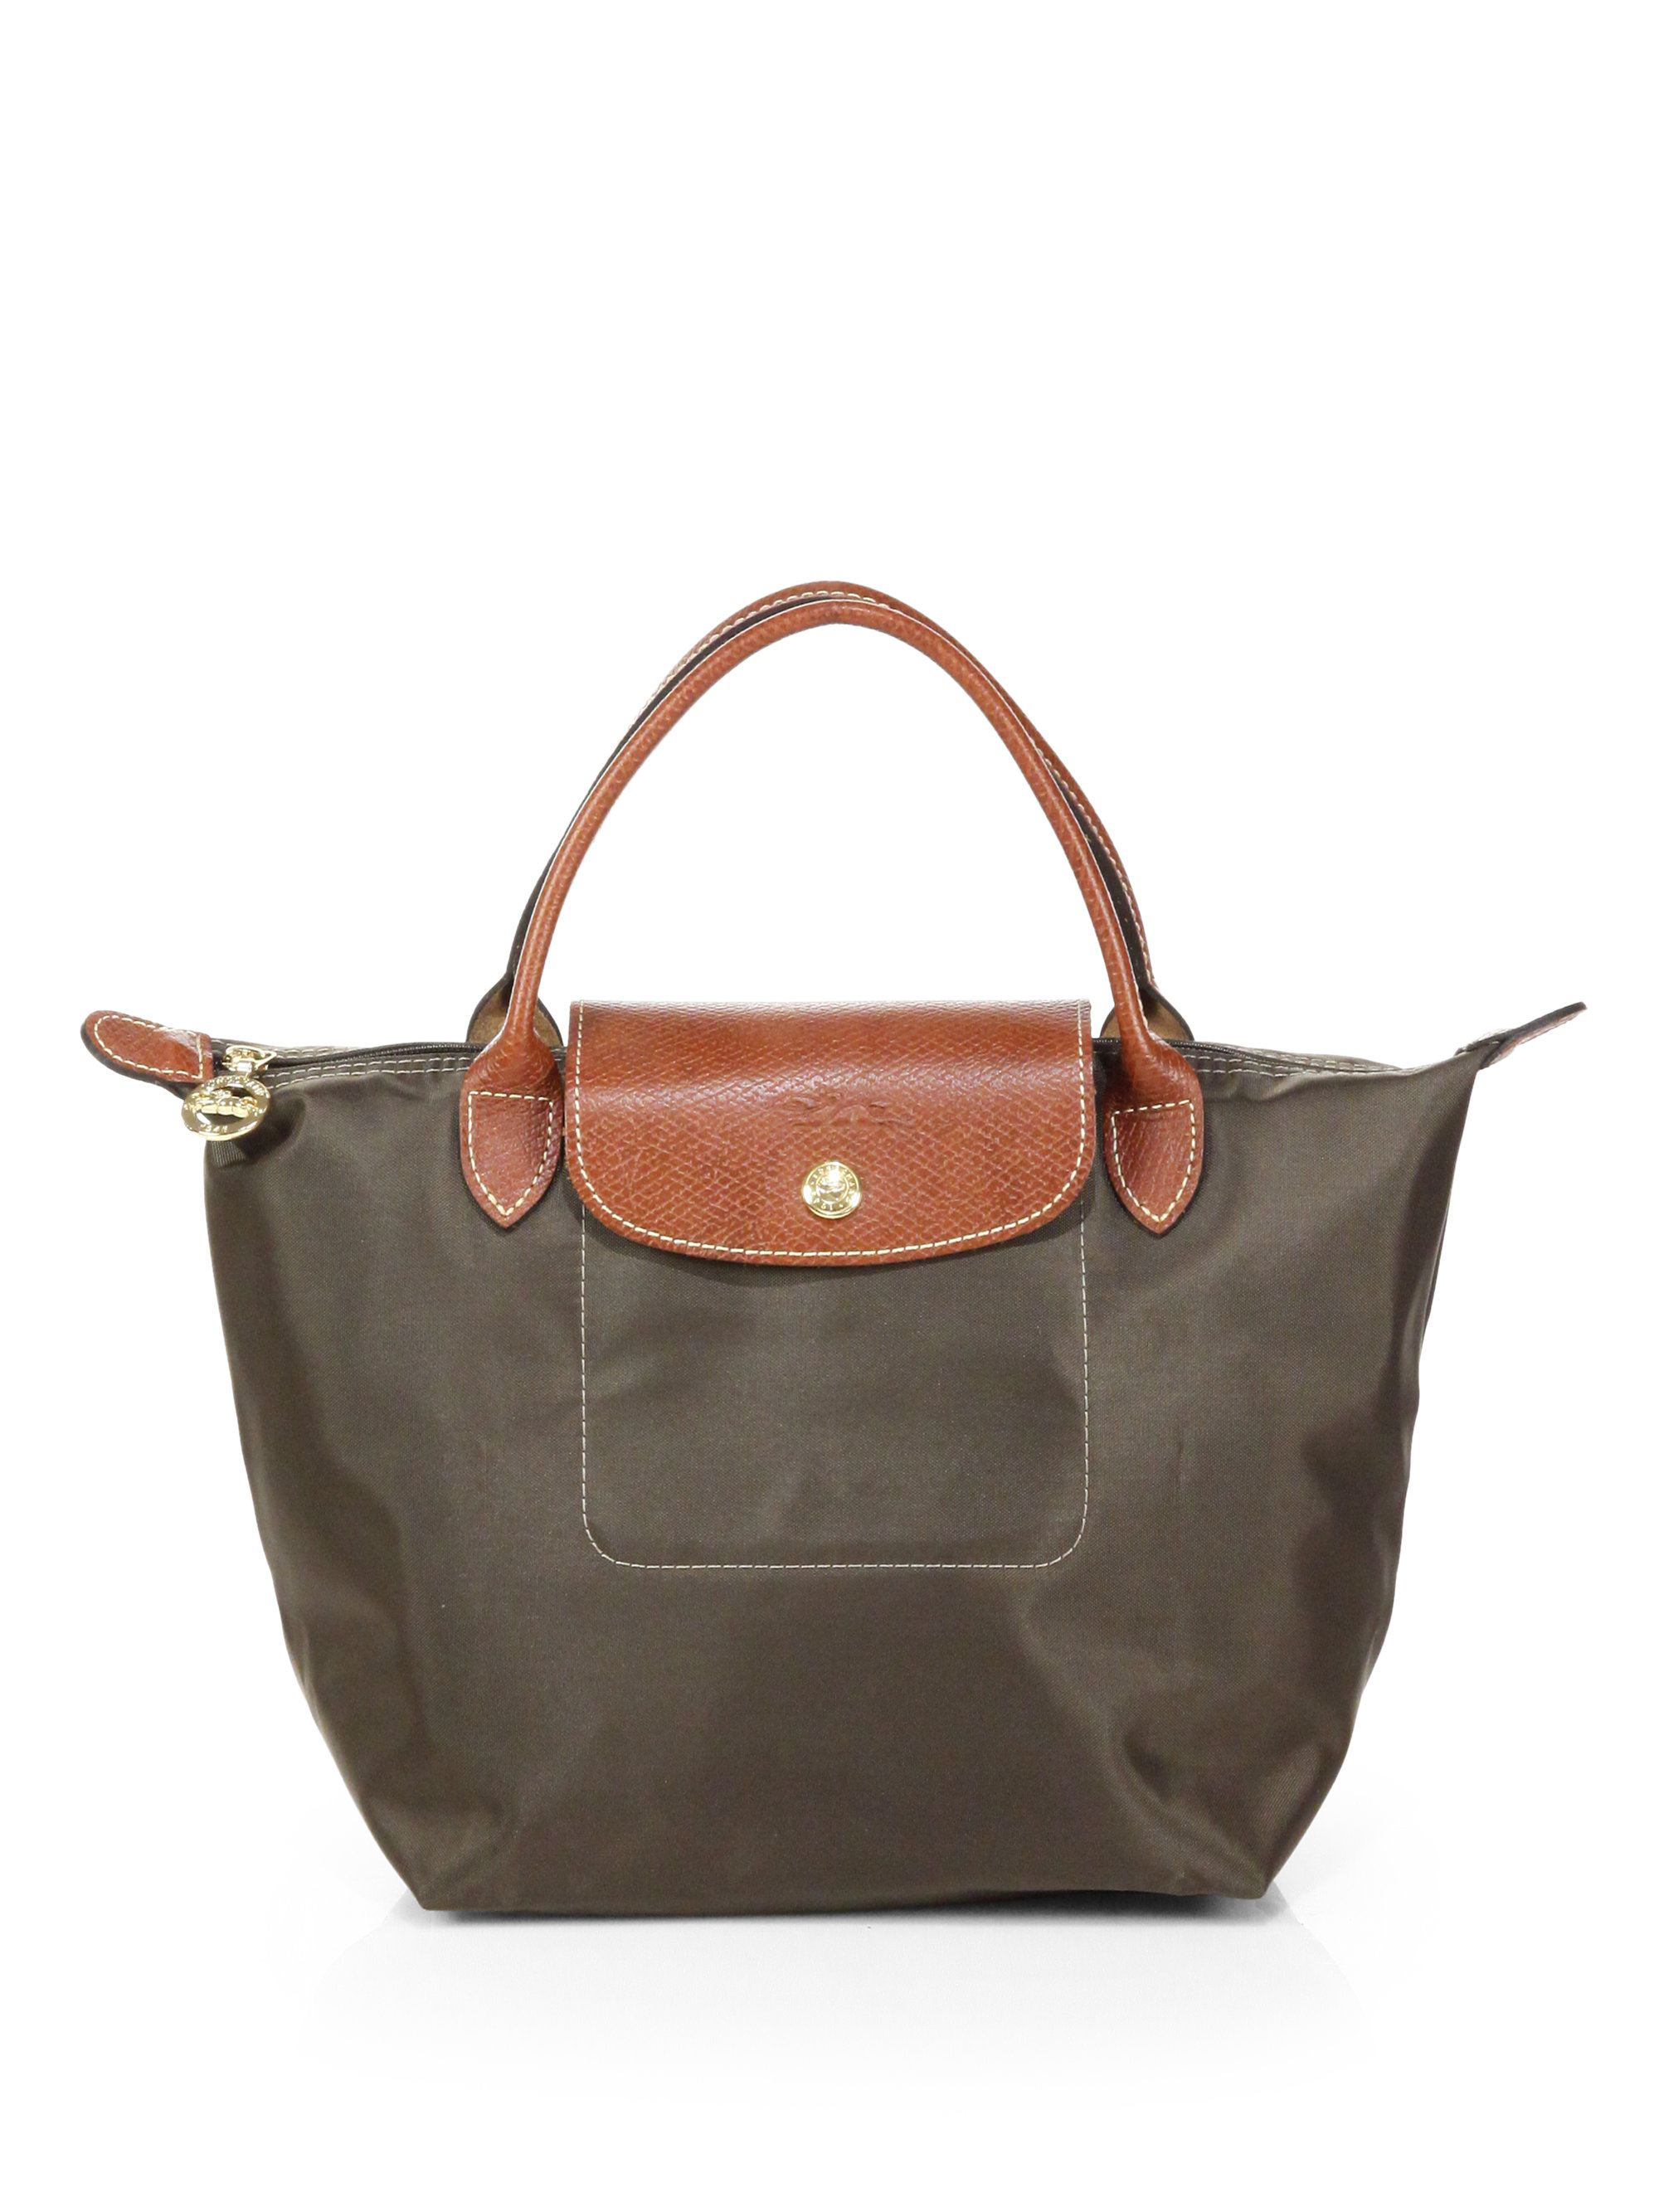 Lyst - Longchamp Small Le Pliage Tote in Gray